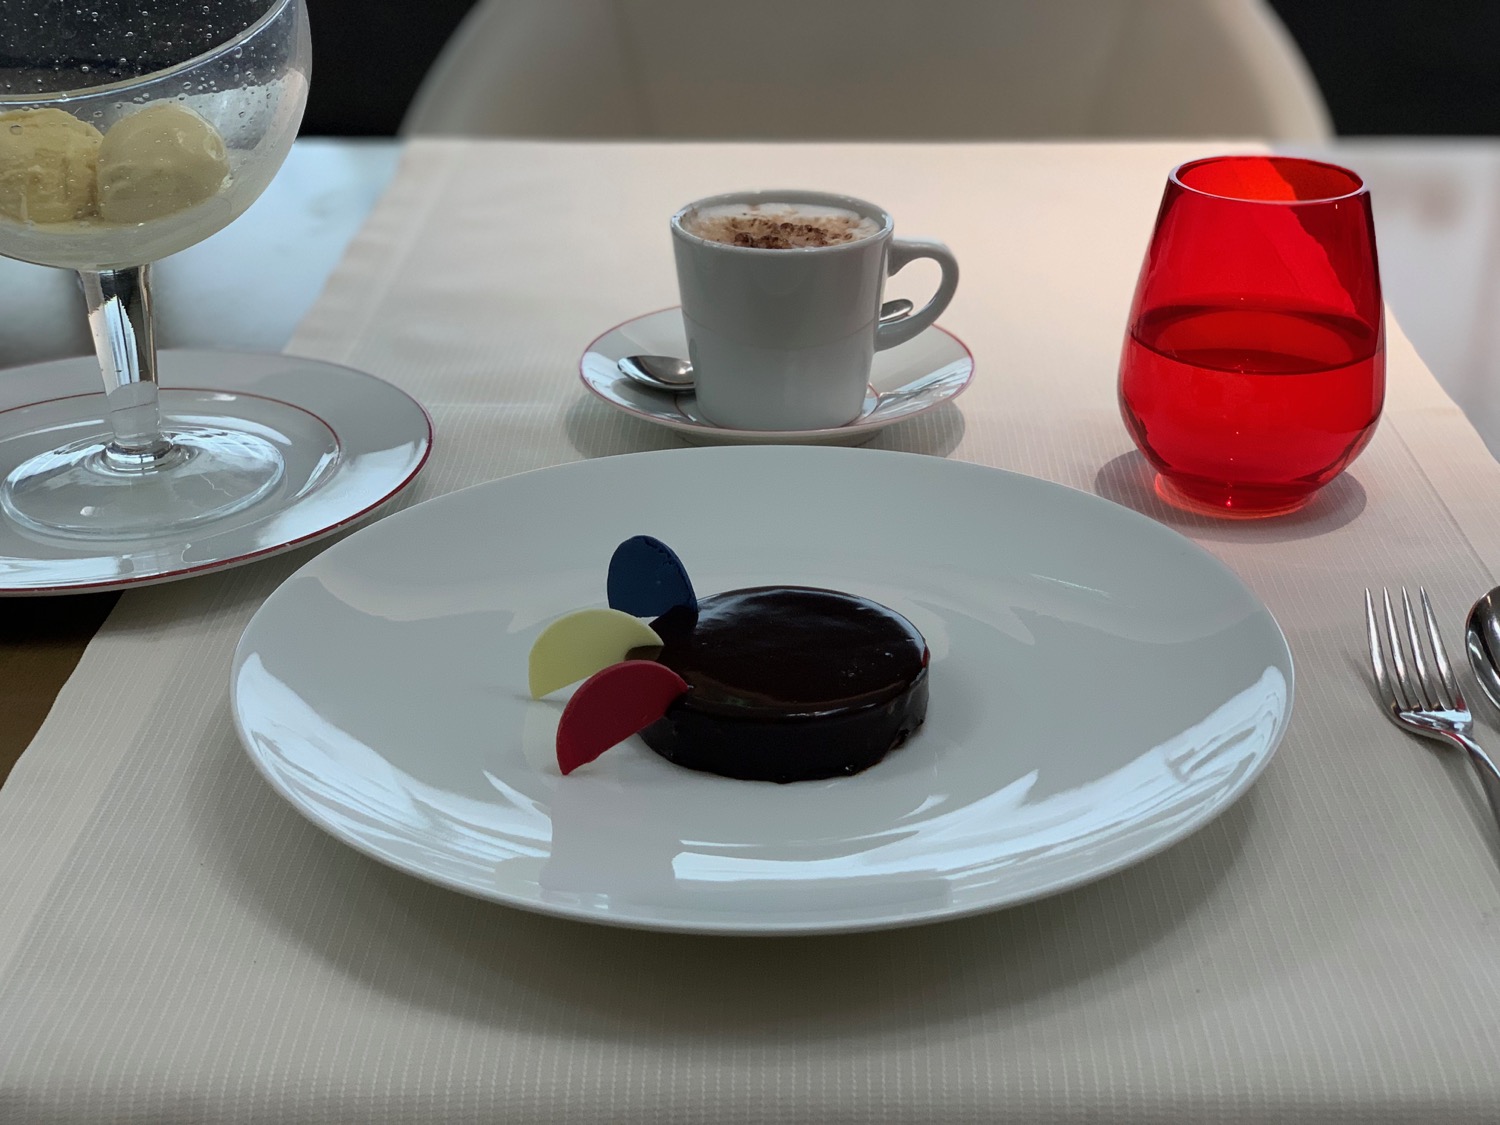 a plate of dessert on a table